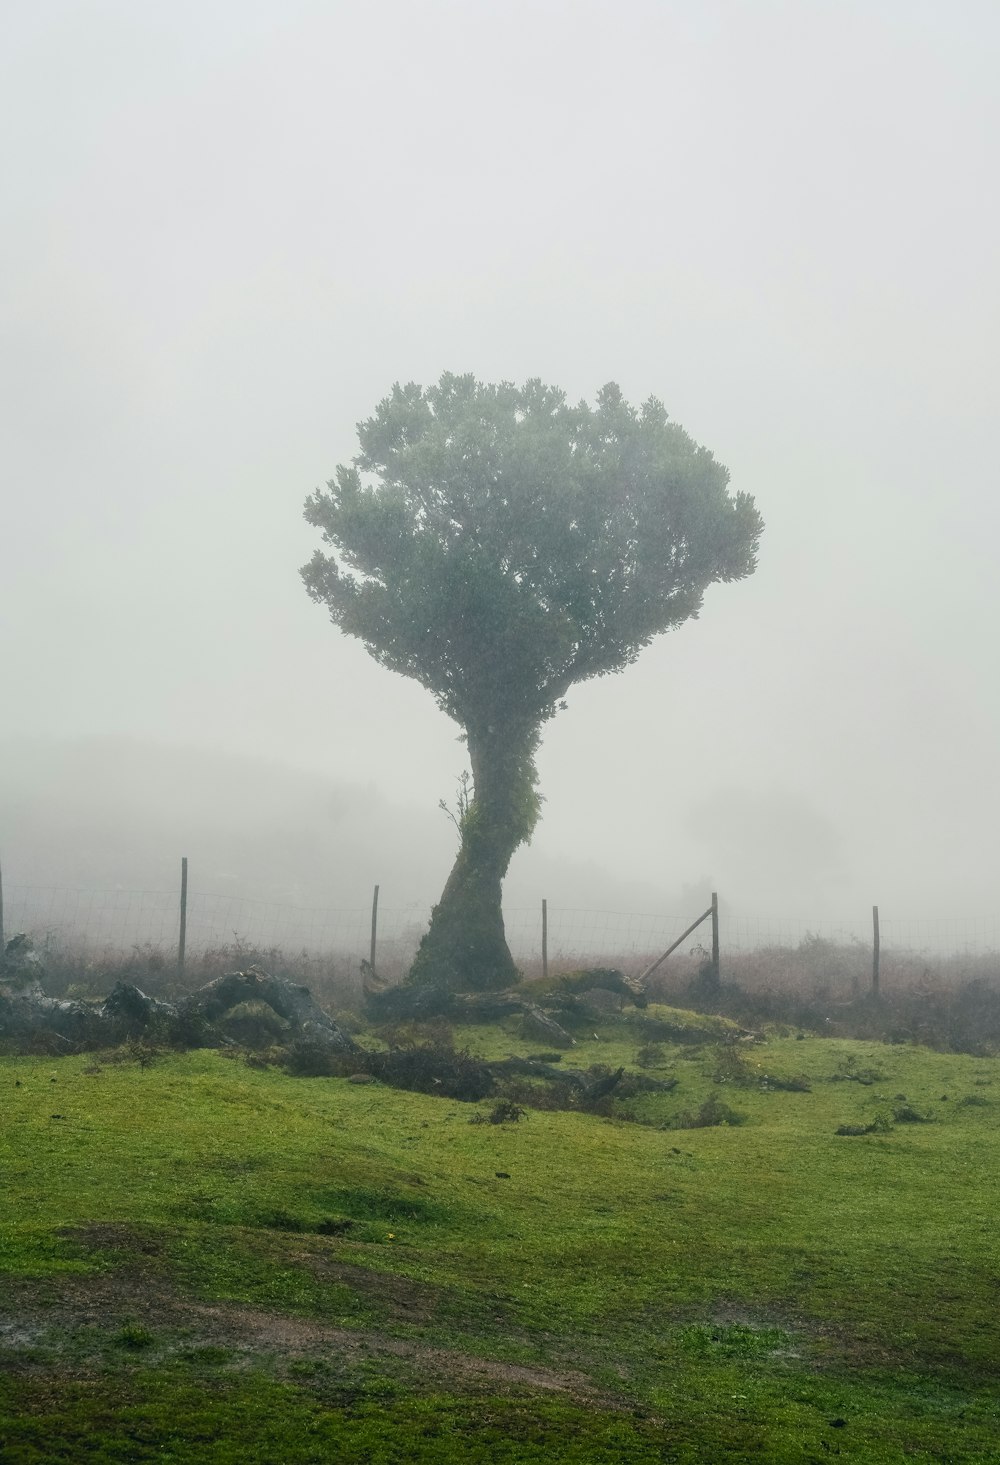 a large tree in a field on a foggy day